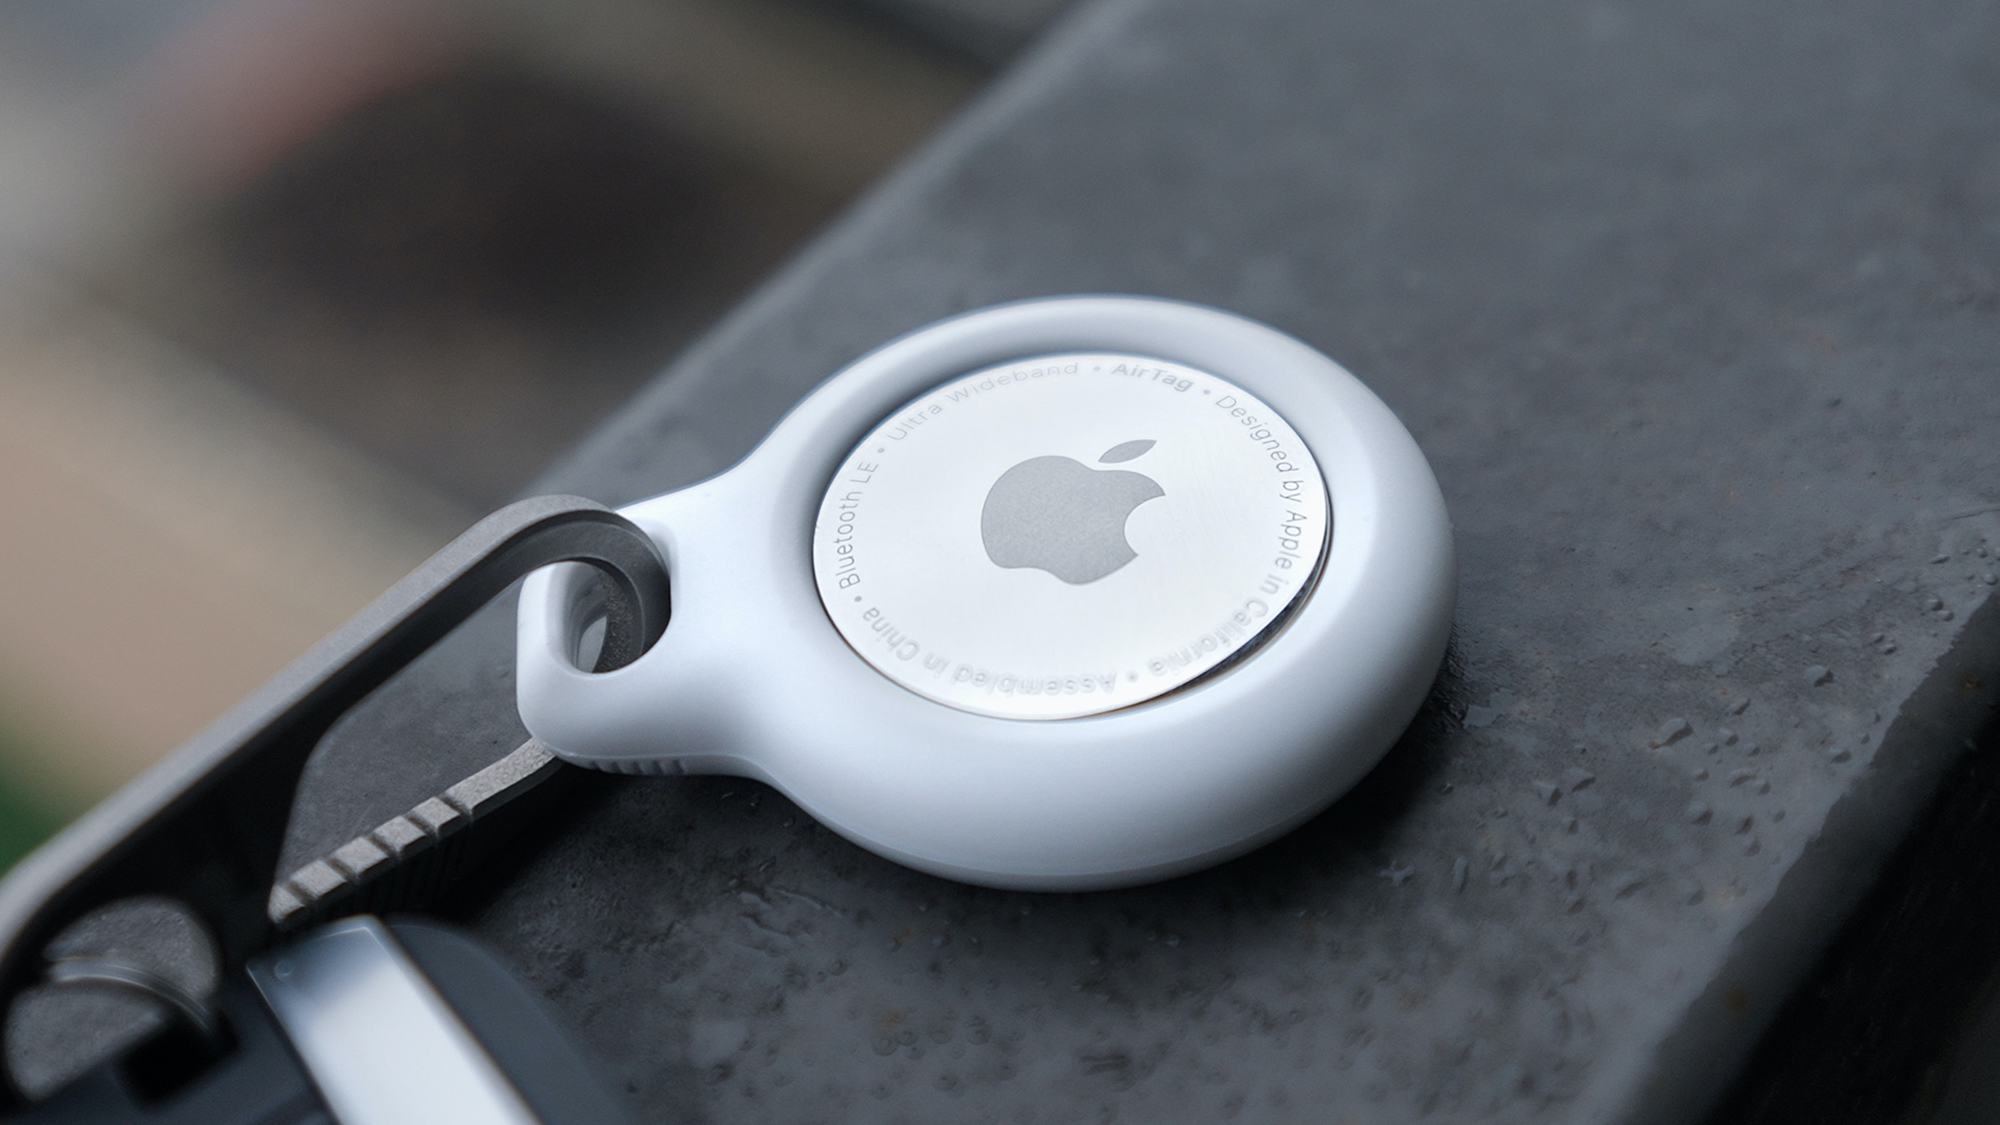 11 cool Apple gadgets that time forgot